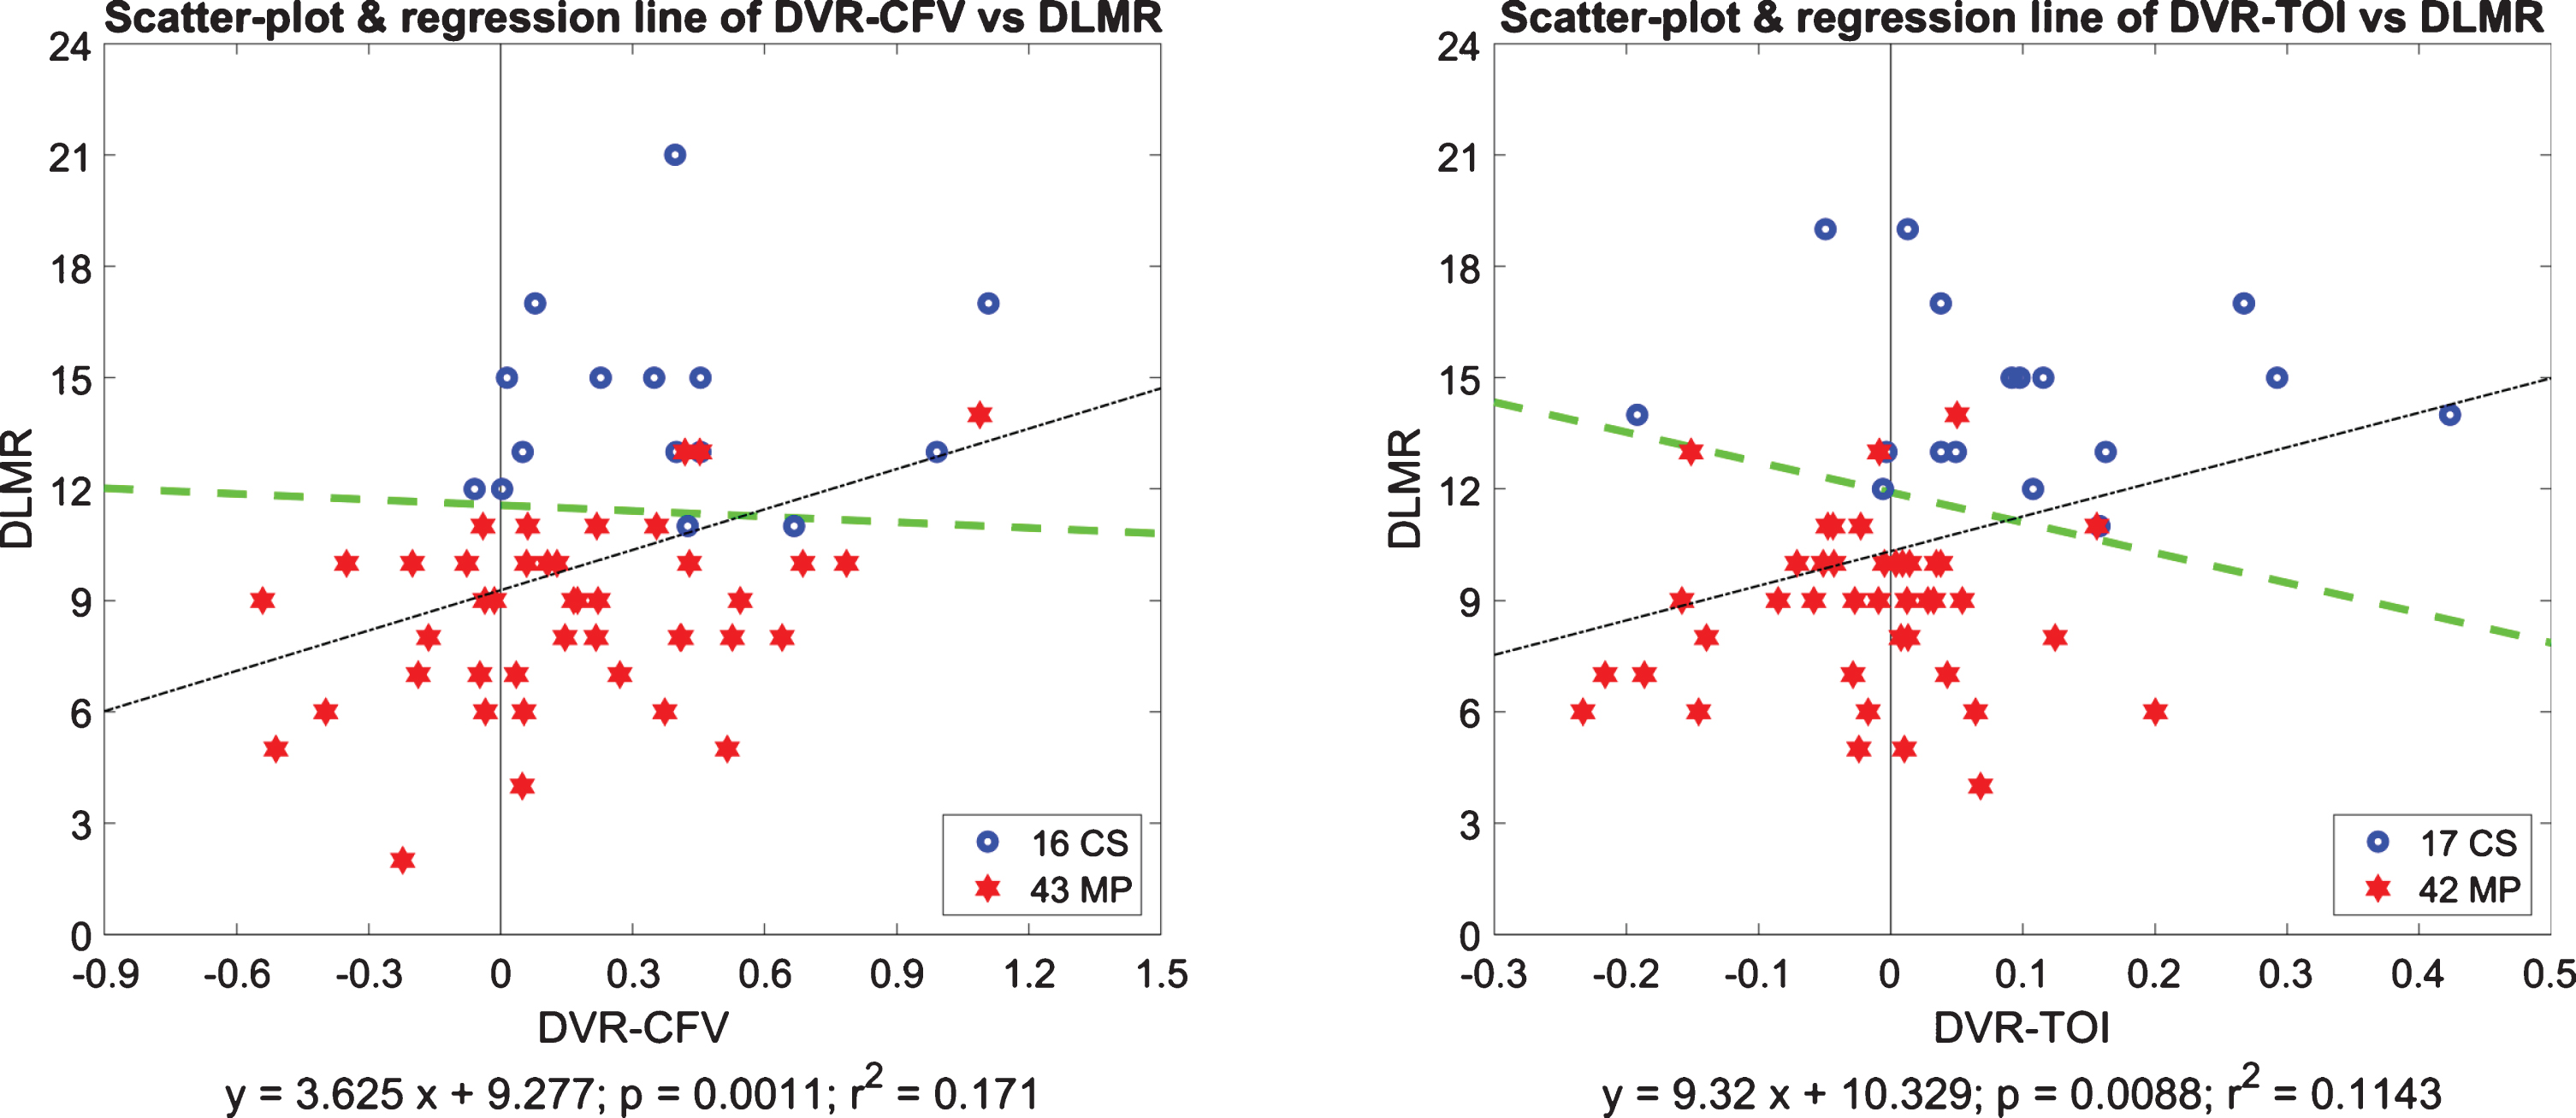 Scatter-plots for Delayed Logical Memory Recall (DLMR) scores versus DVR-CFV index (left) and DVR-TOI index (right) with the regression lines (dotted black) indicating significant correlation between DLMR and both DVR indices (p = 0.0011 for DVR-CFV and p = 0.0088 for DVR-TOI). The Fisher Discriminants are also shown as dashed green lines and suggest the potential use of the Composite Indices: [DLMR + 0.51×DVR-CFV] and [DLMR + 8.33×DVR-TOI] to achieve improved delineation between MP and CS (p∼10–10).